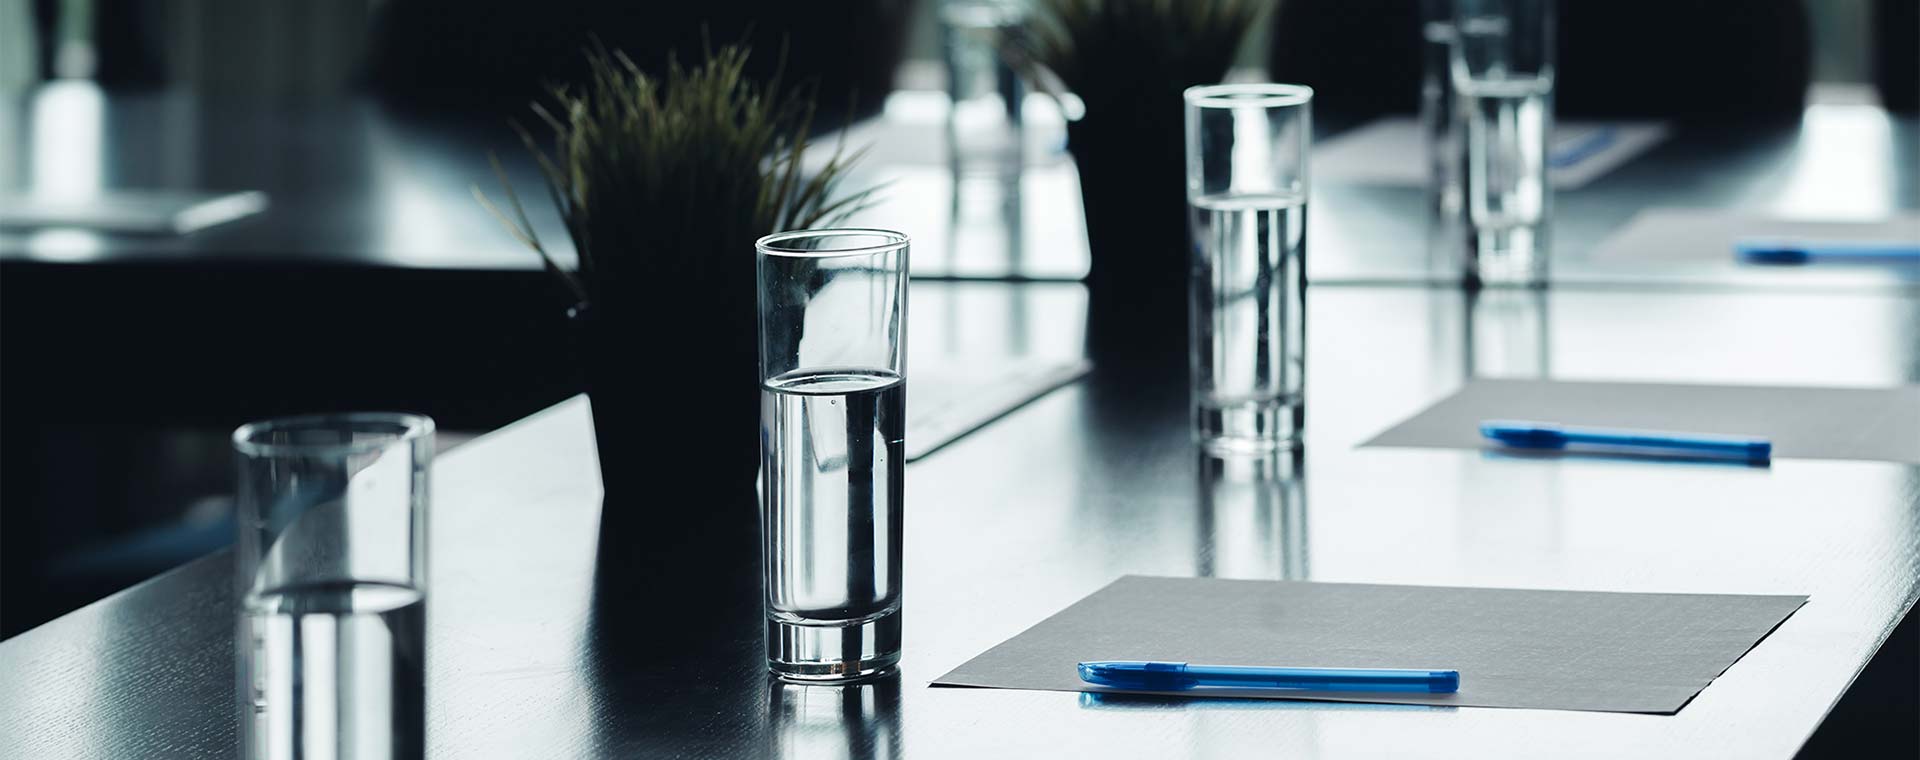 A close up of a conference room light by nature light. On the table are four glasses of water, notepaper, pens and succulent plants.